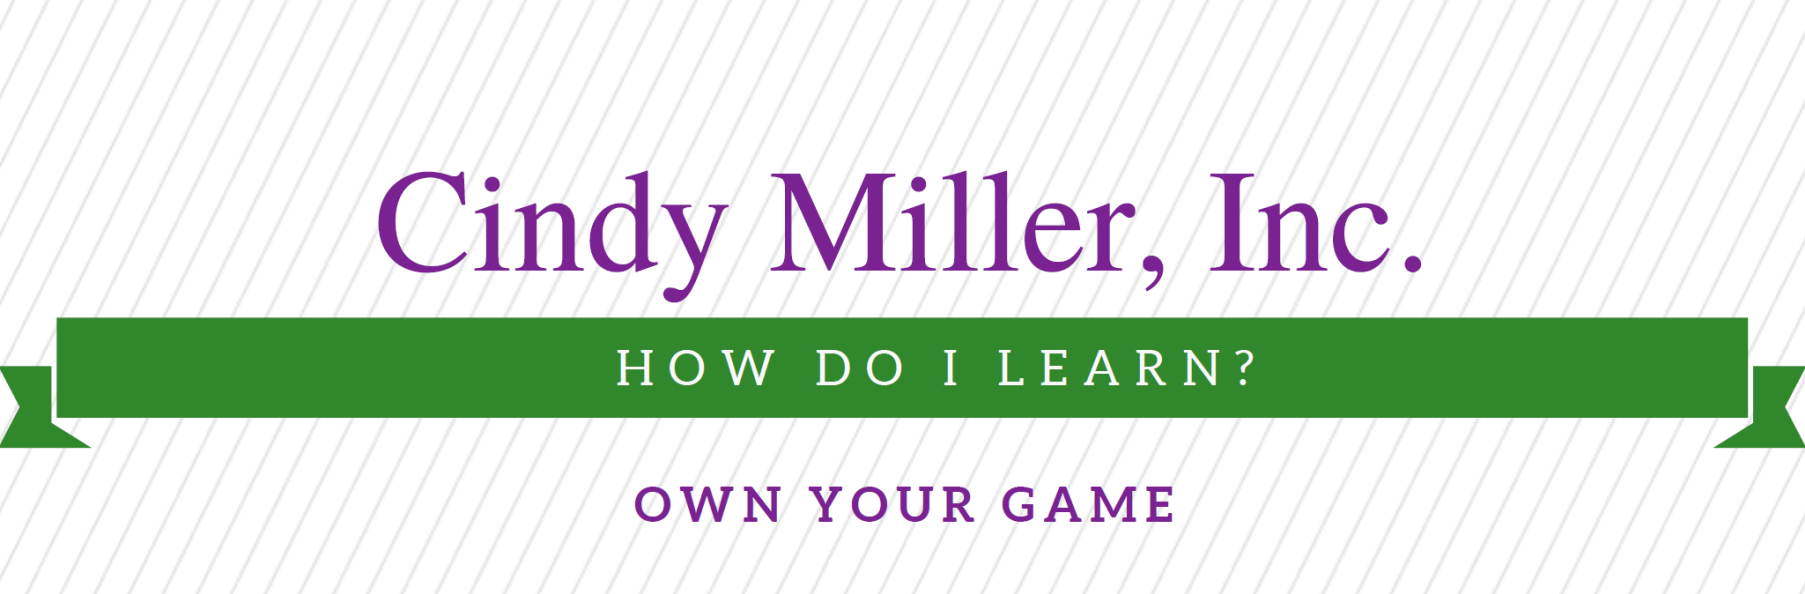 Own Your Game: How Do I Learn?